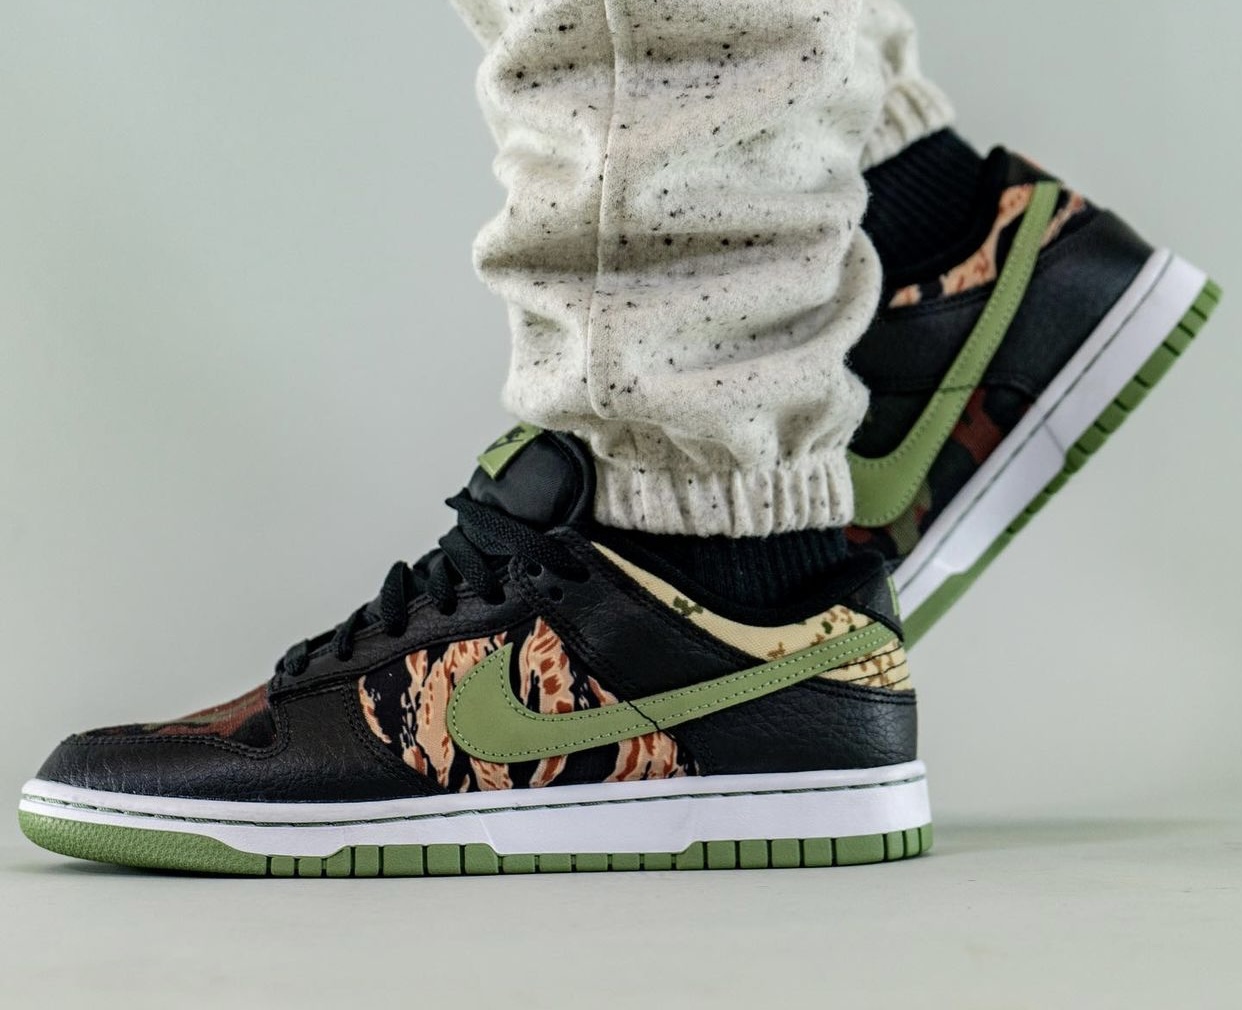 Nike Dunk Low Camo DH0957 001 Release Date On Feet 1